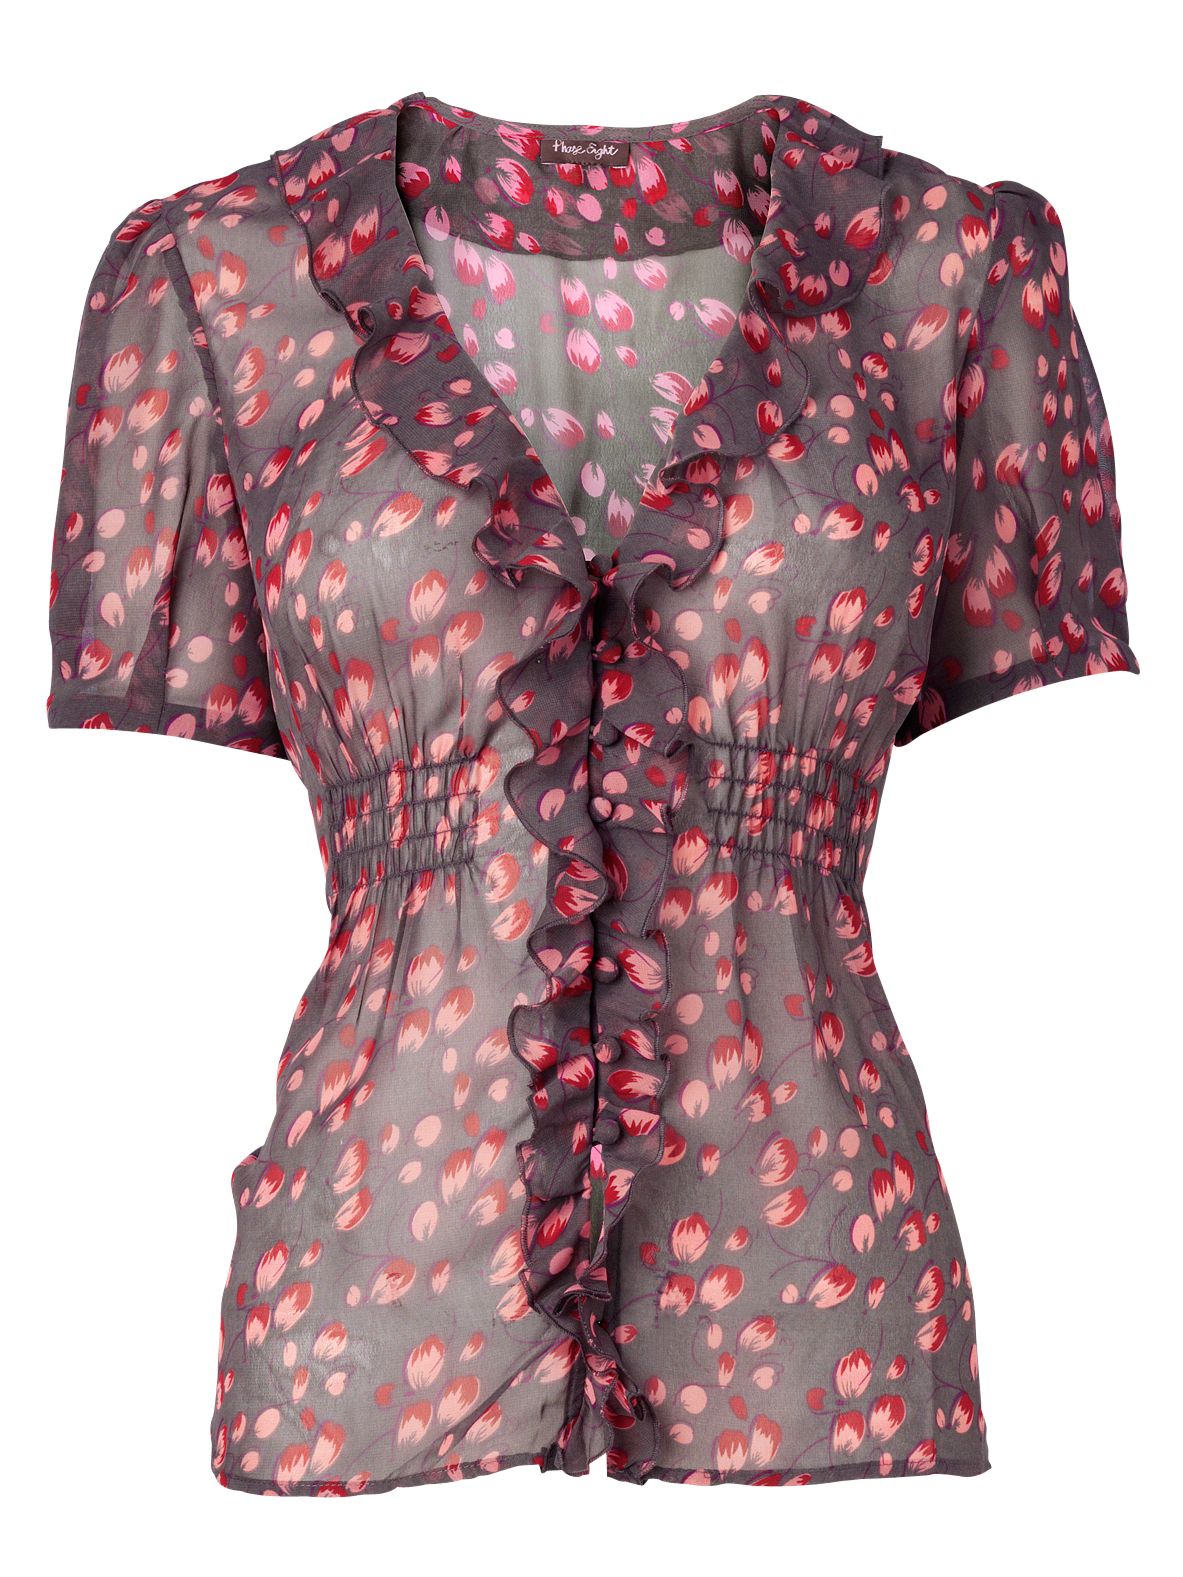 Phase Eight Tulip Blouse, Charcoal/Pink